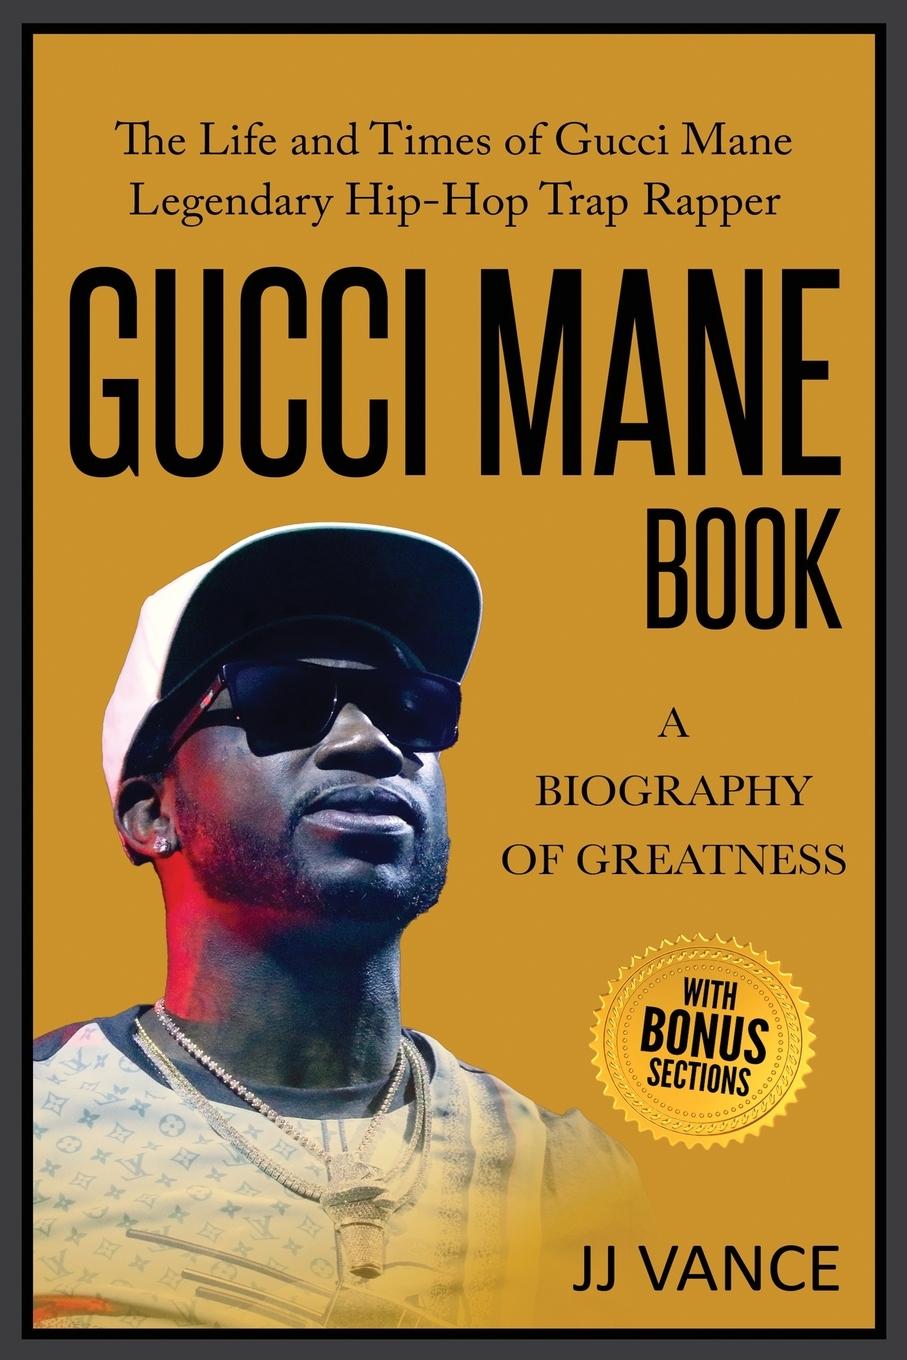 Carte Gucci Mane Book - A Biography of Greatness 